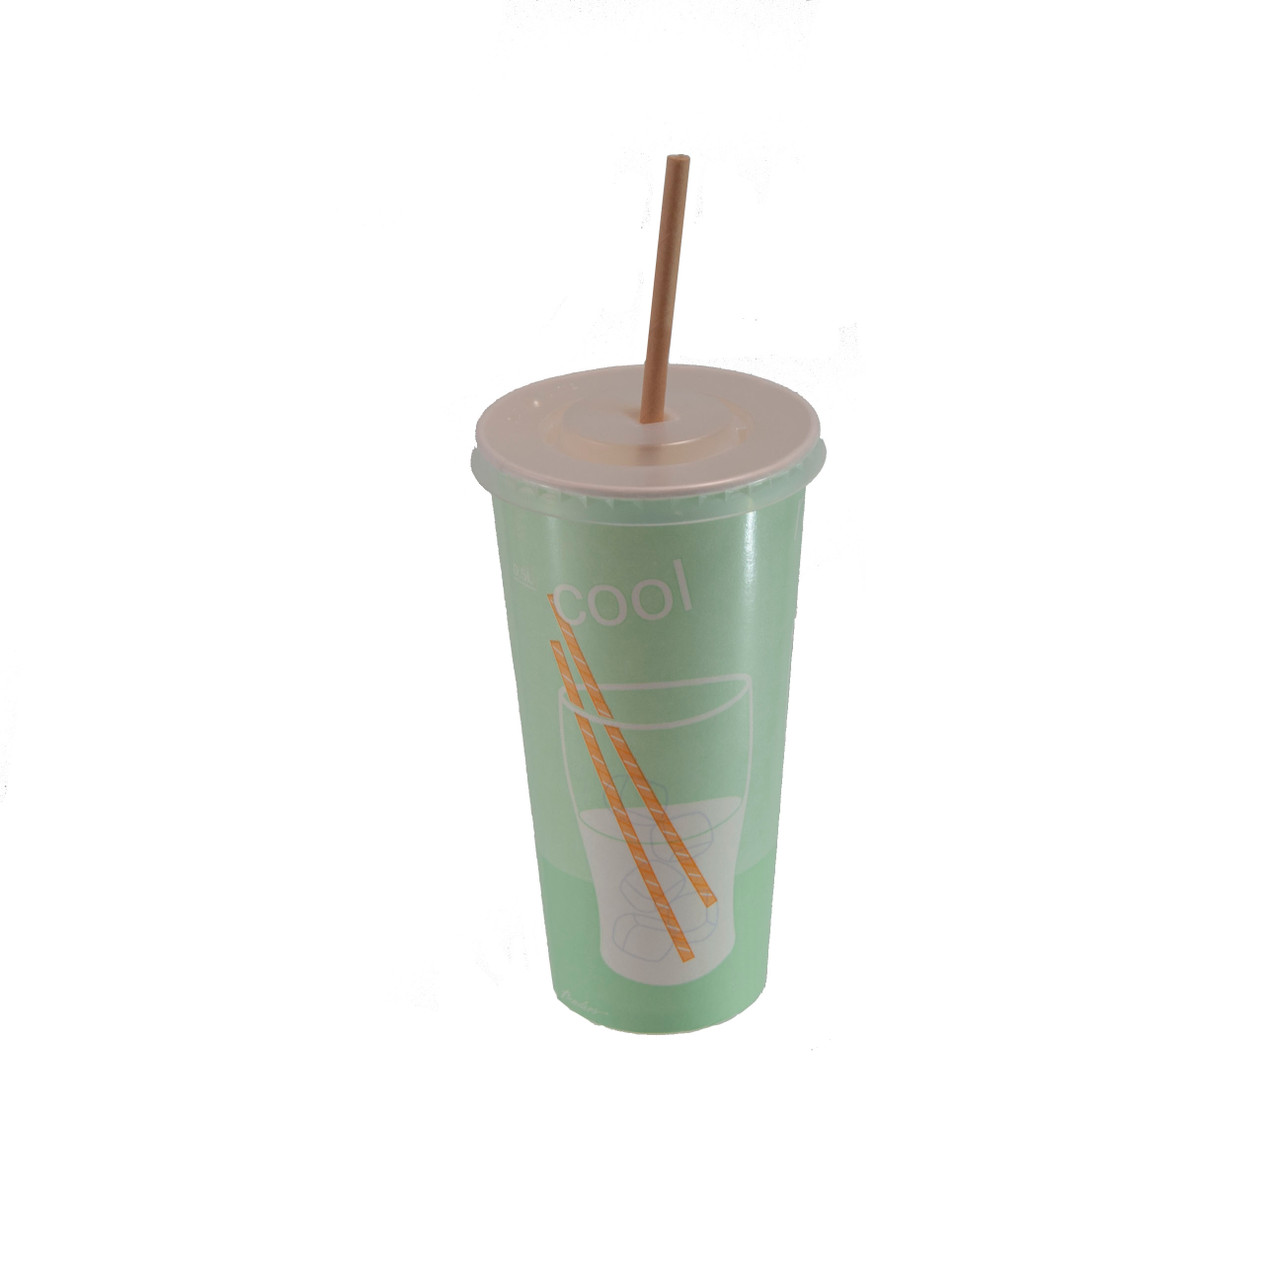 https://cdn11.bigcommerce.com/s-tjx0gy7pkp/images/stencil/1280x1280/products/14990/21610/Paper_cup_large_22_oz_lids_straws_angled_main__95691.1559749150.jpg?c=2